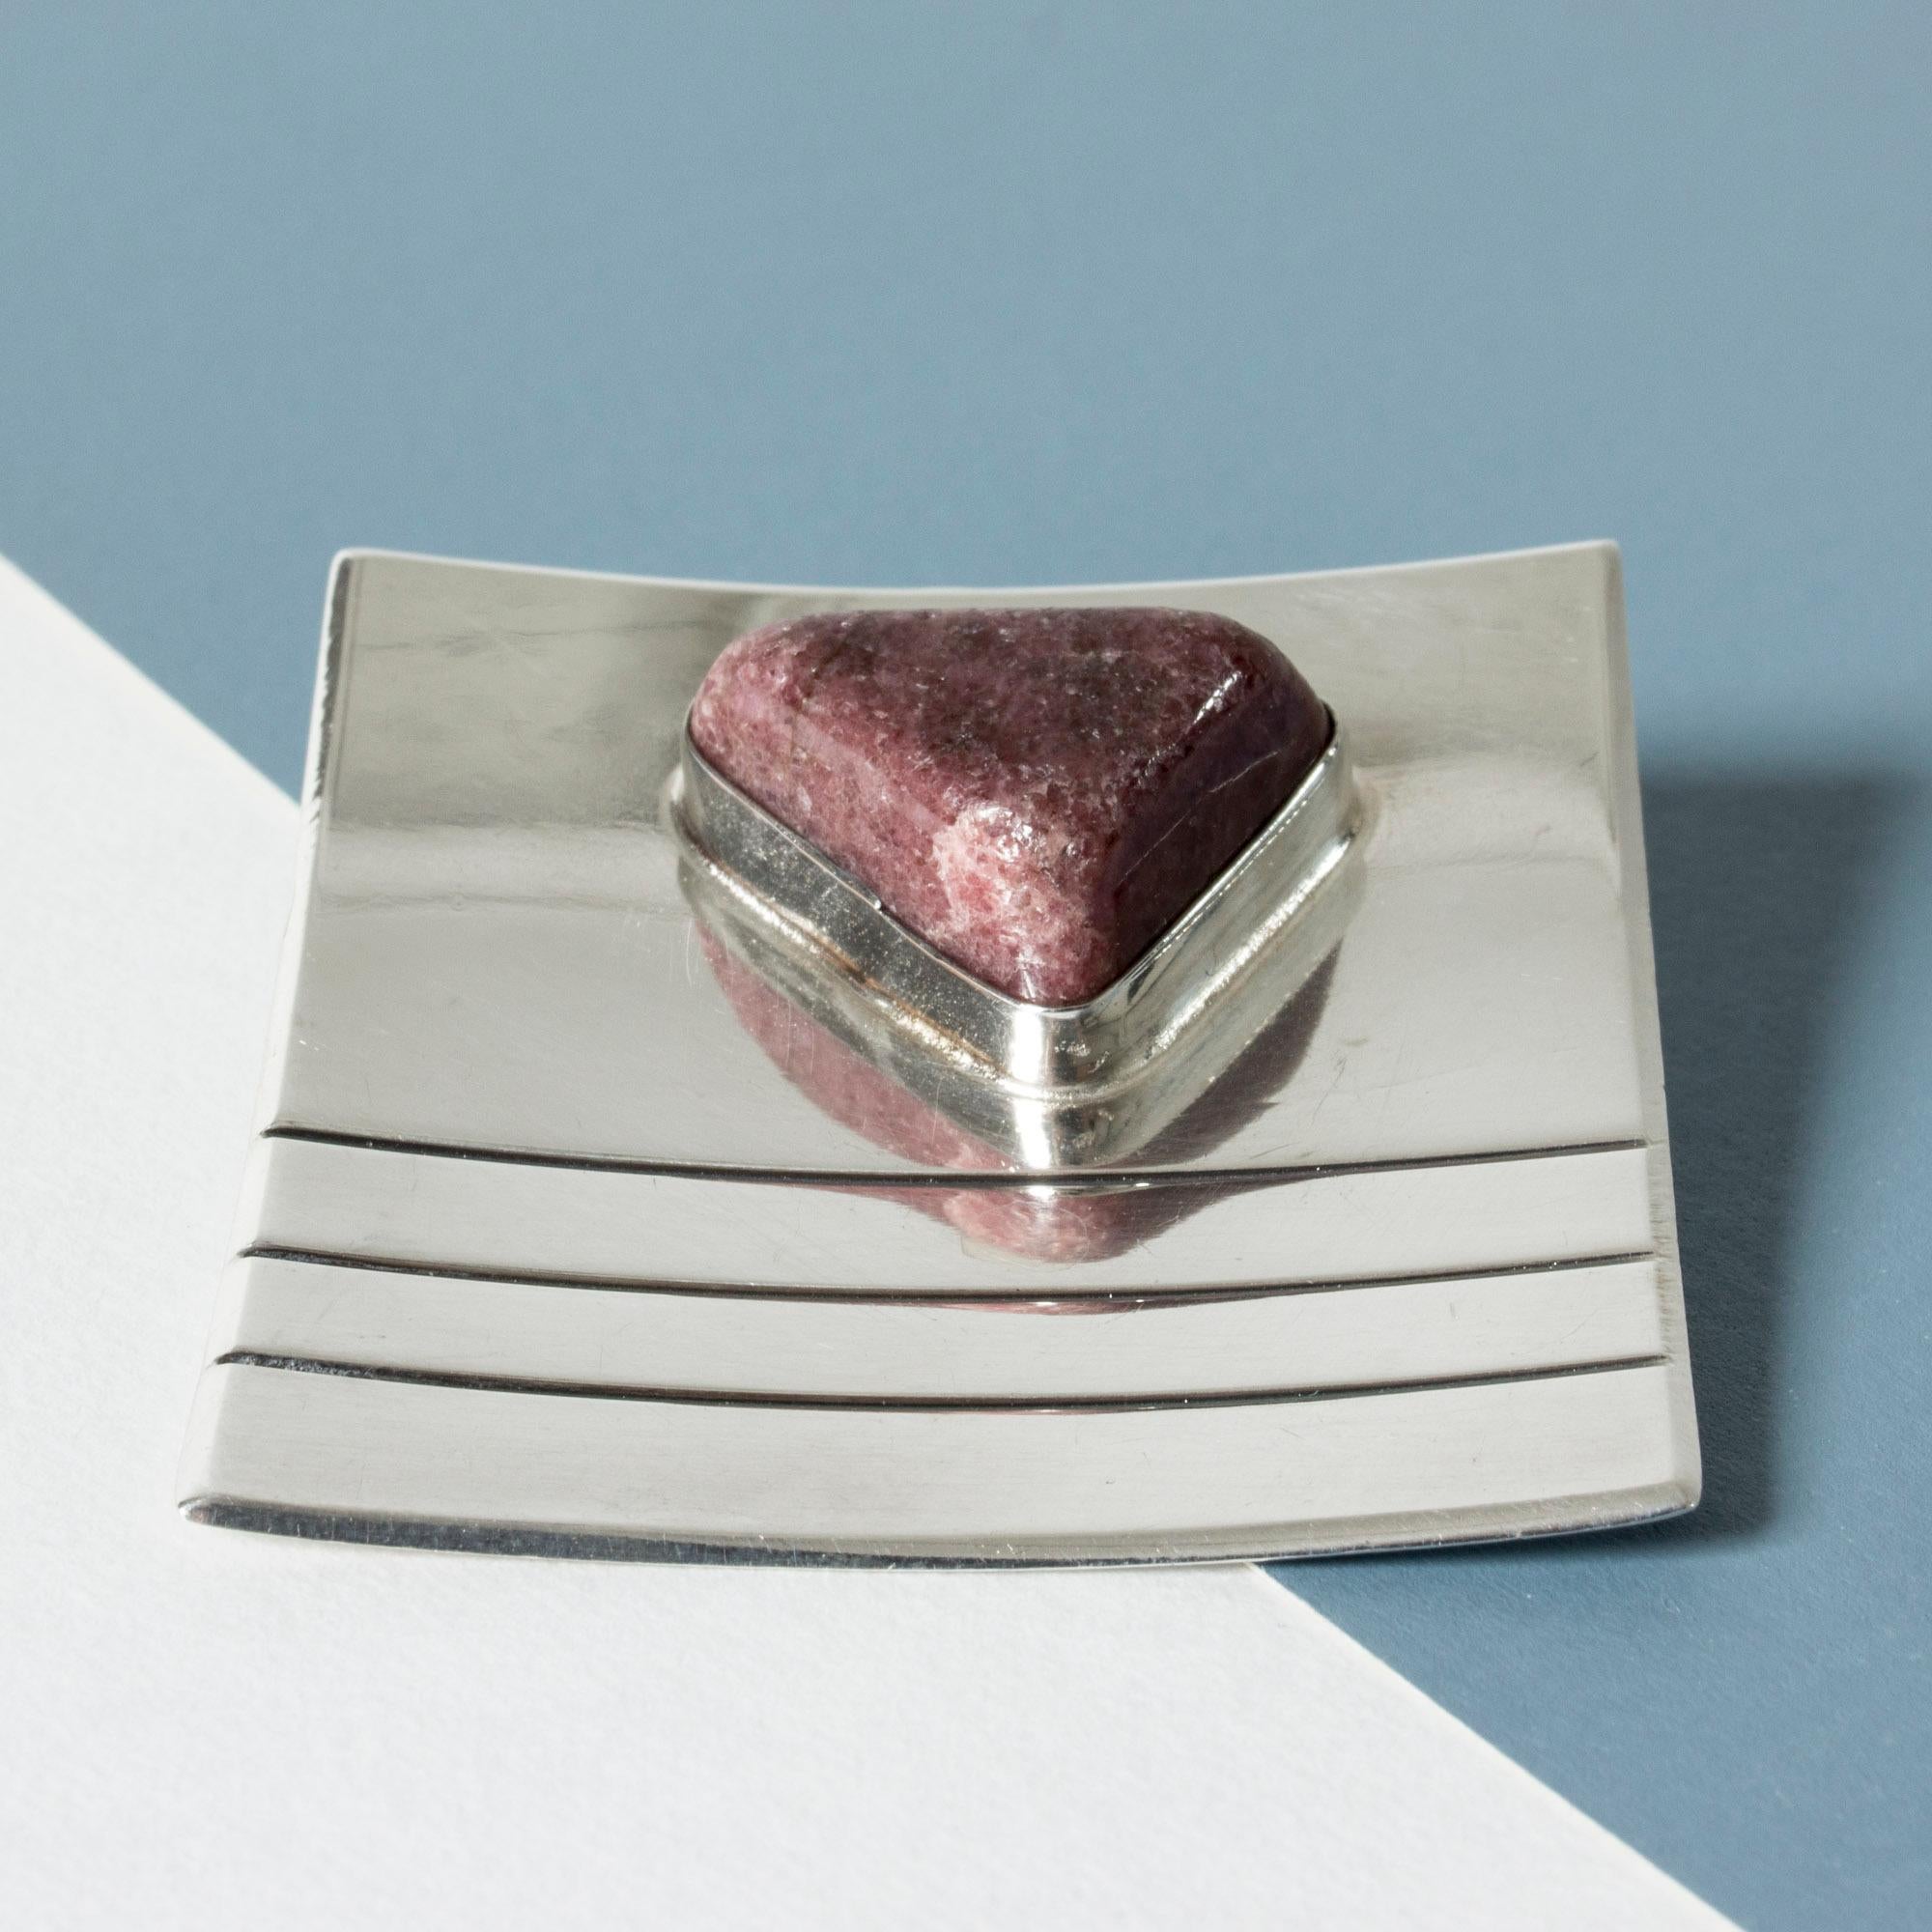 Striking, large brooch by Heikki Kaksonen, made from silver in a square form with embossed stripes. Red aventurine stone in an organic form, makes a beautiful contrast.